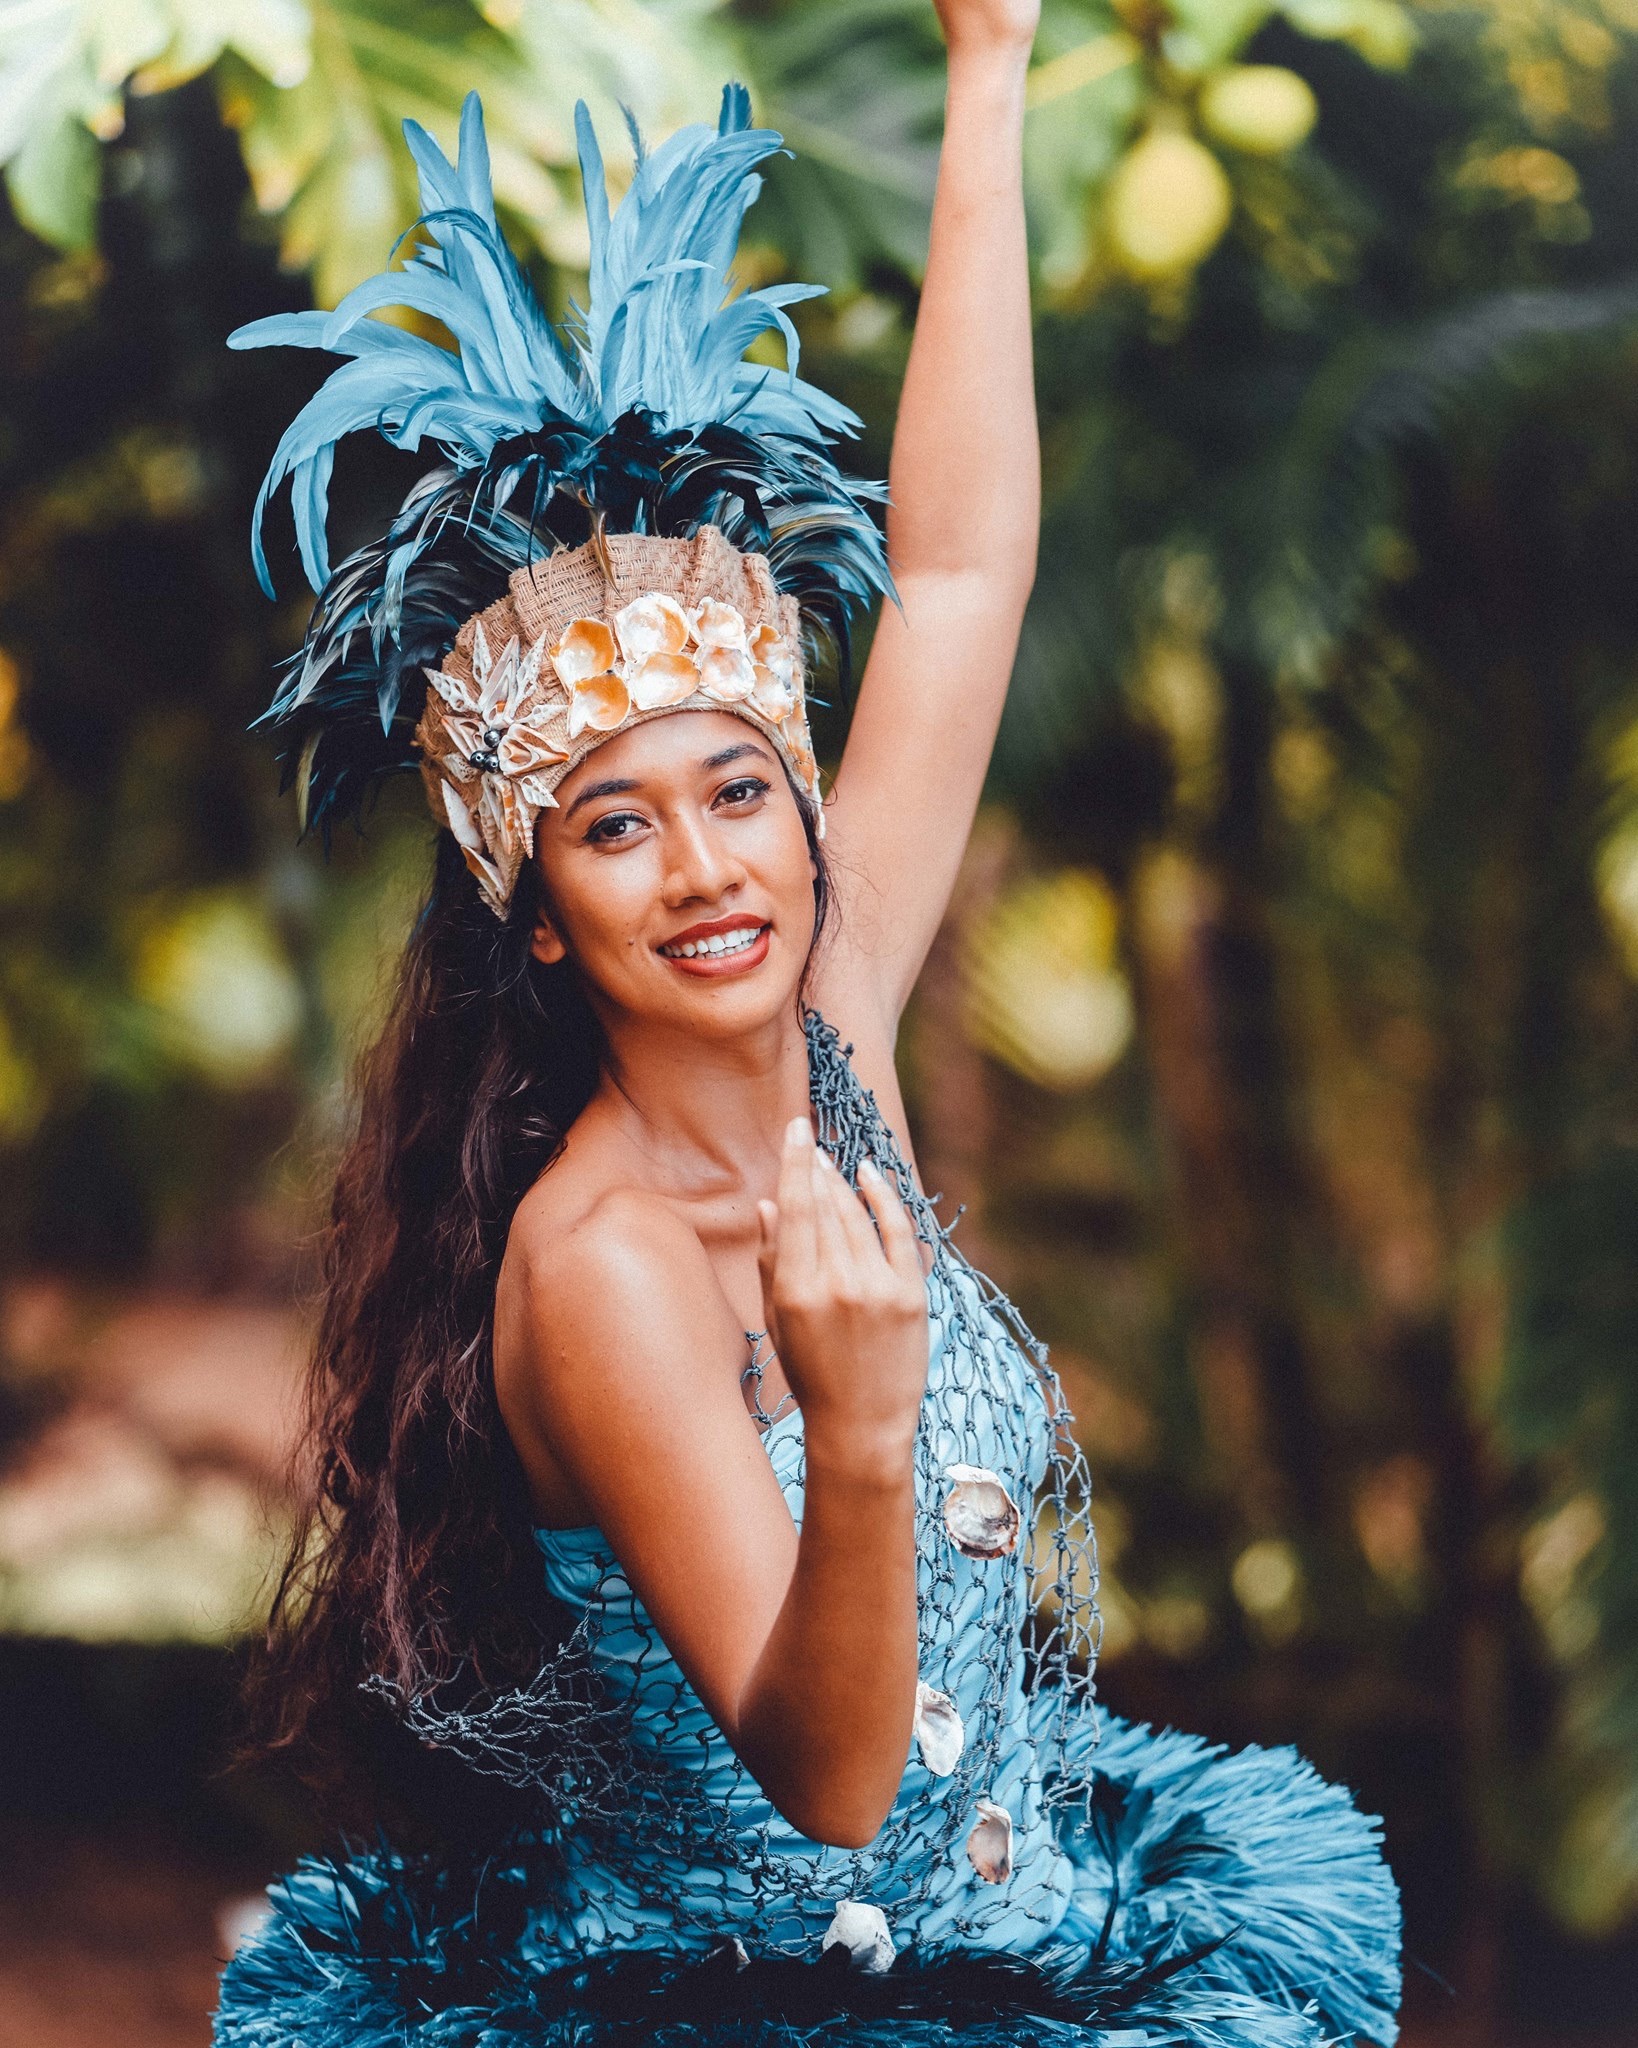 Cook Islands to miss Pacific Islands pageant again